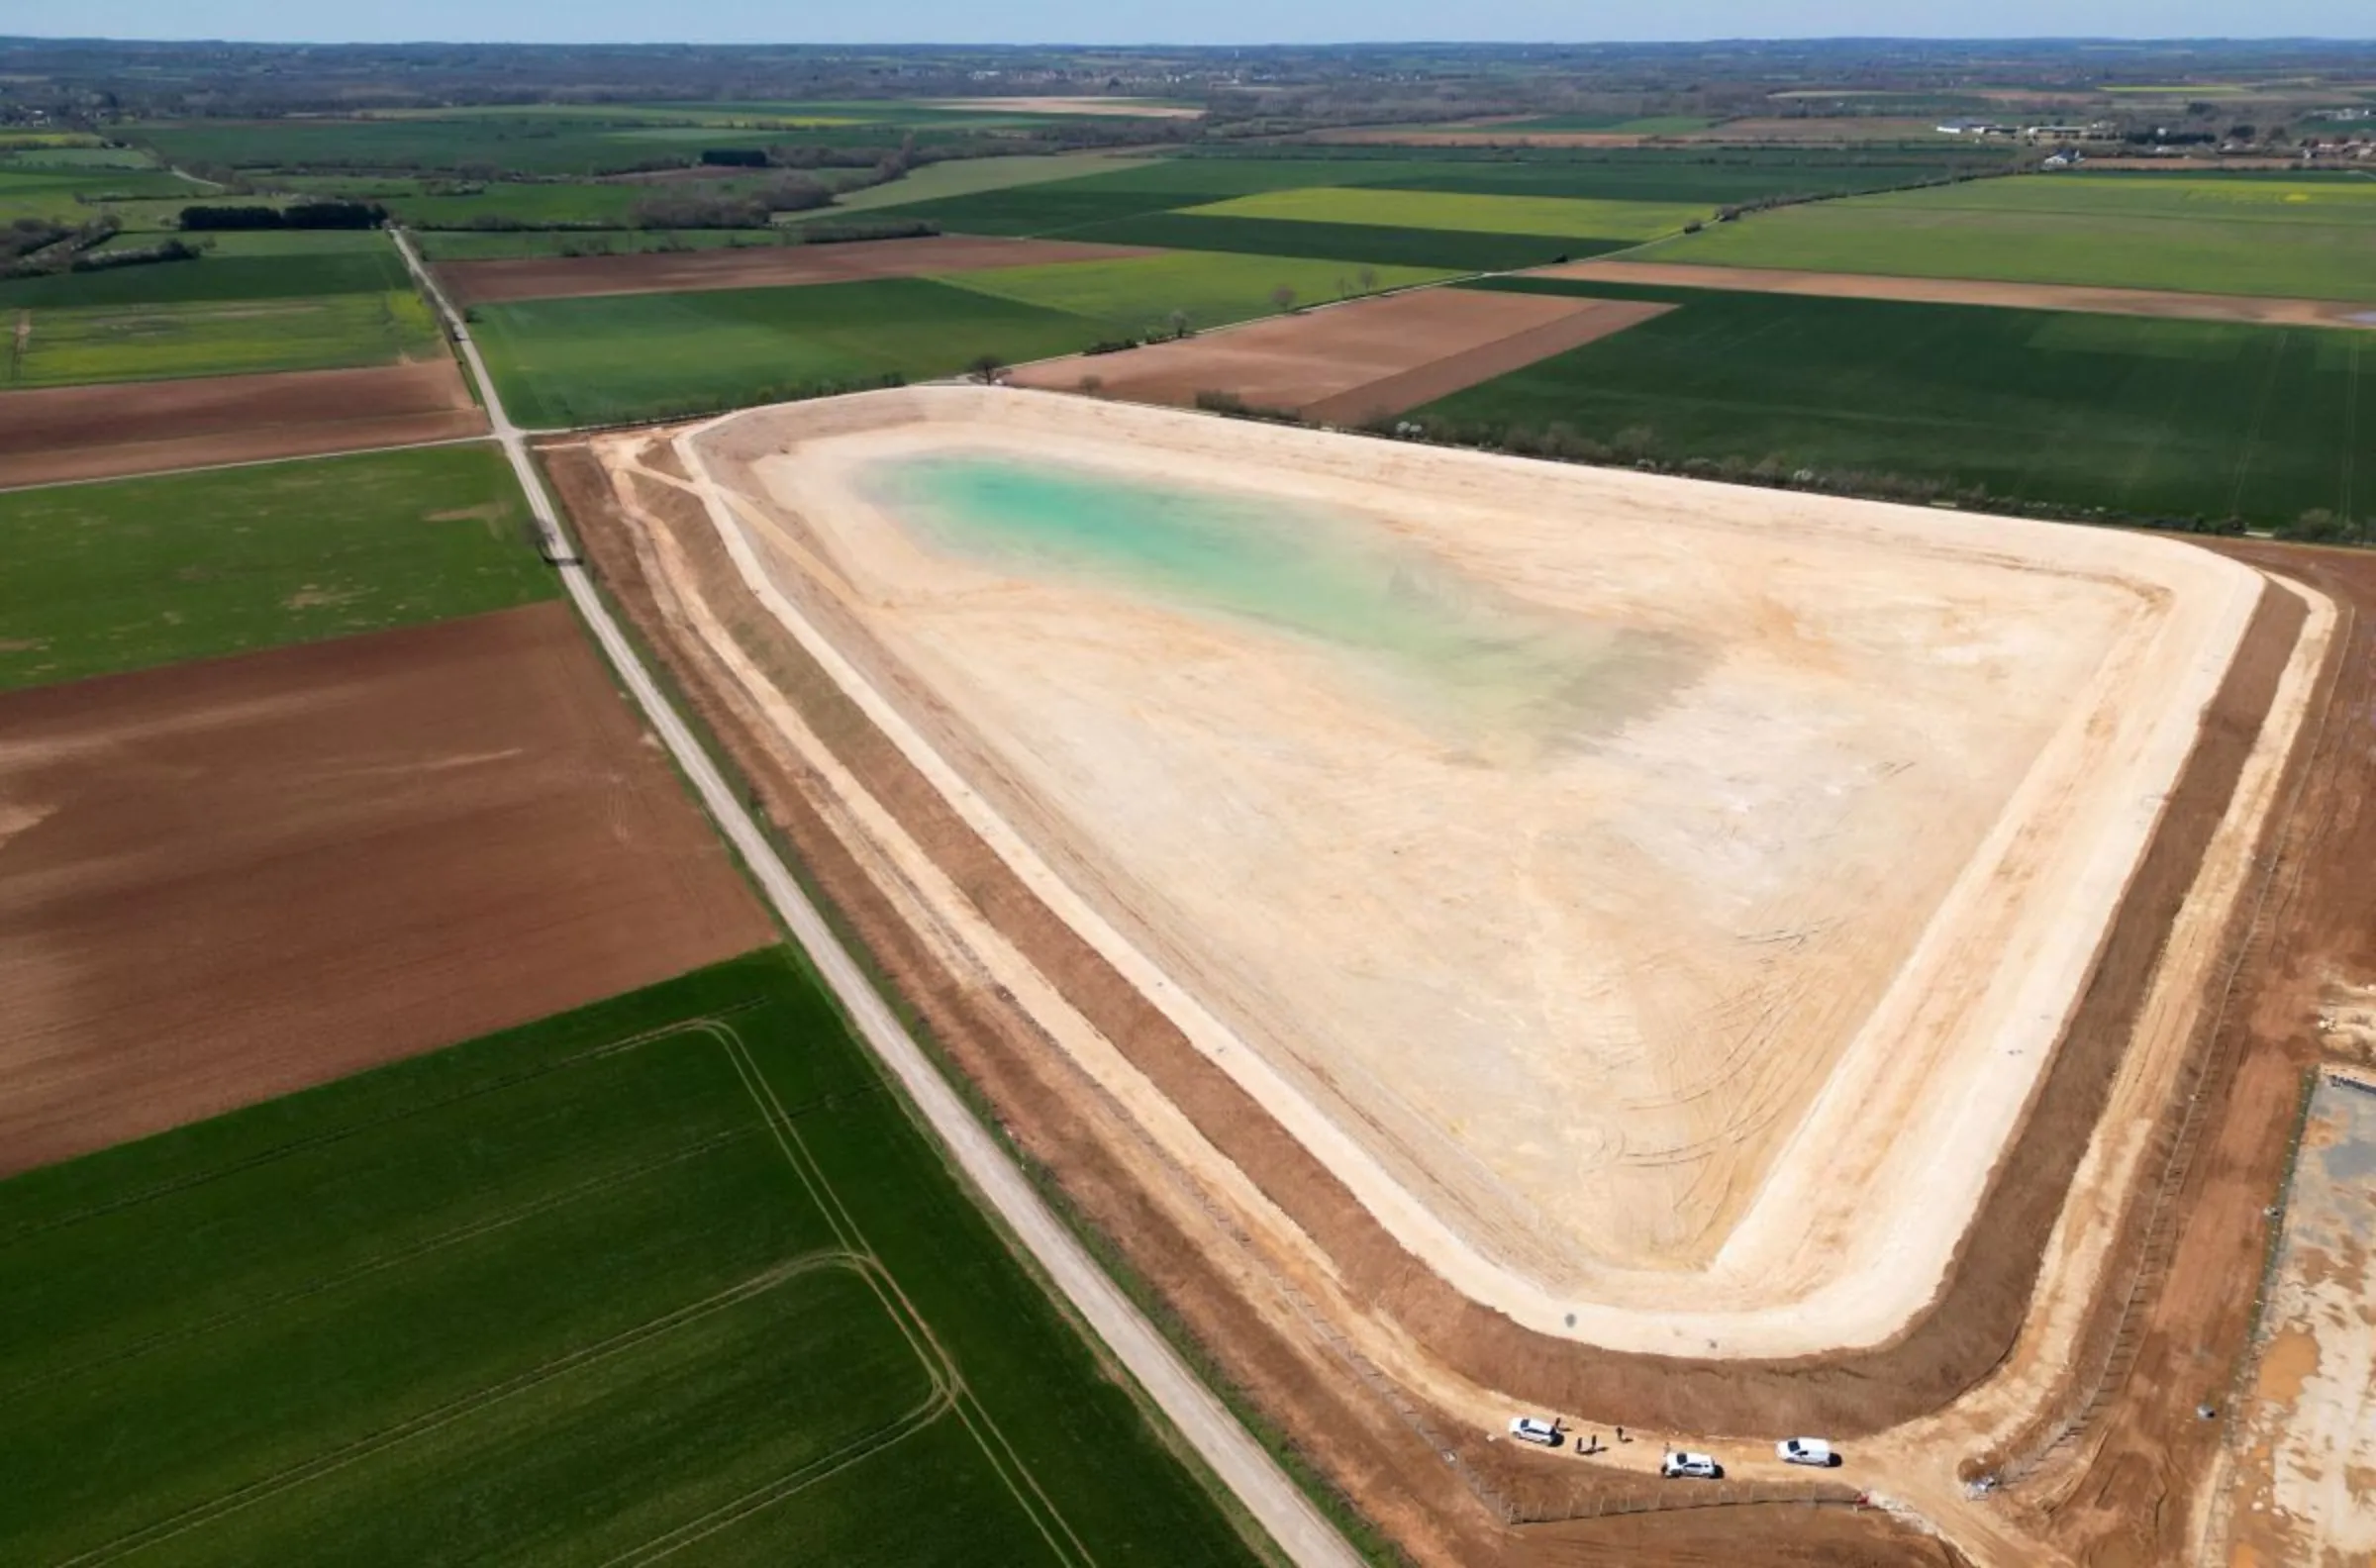 An aerial view shows the construction site of new water storage infrastructure for agricultural irrigation in western France, in Sainte-Soline, France April 4, 2023. REUTERS/Stephane Mahe